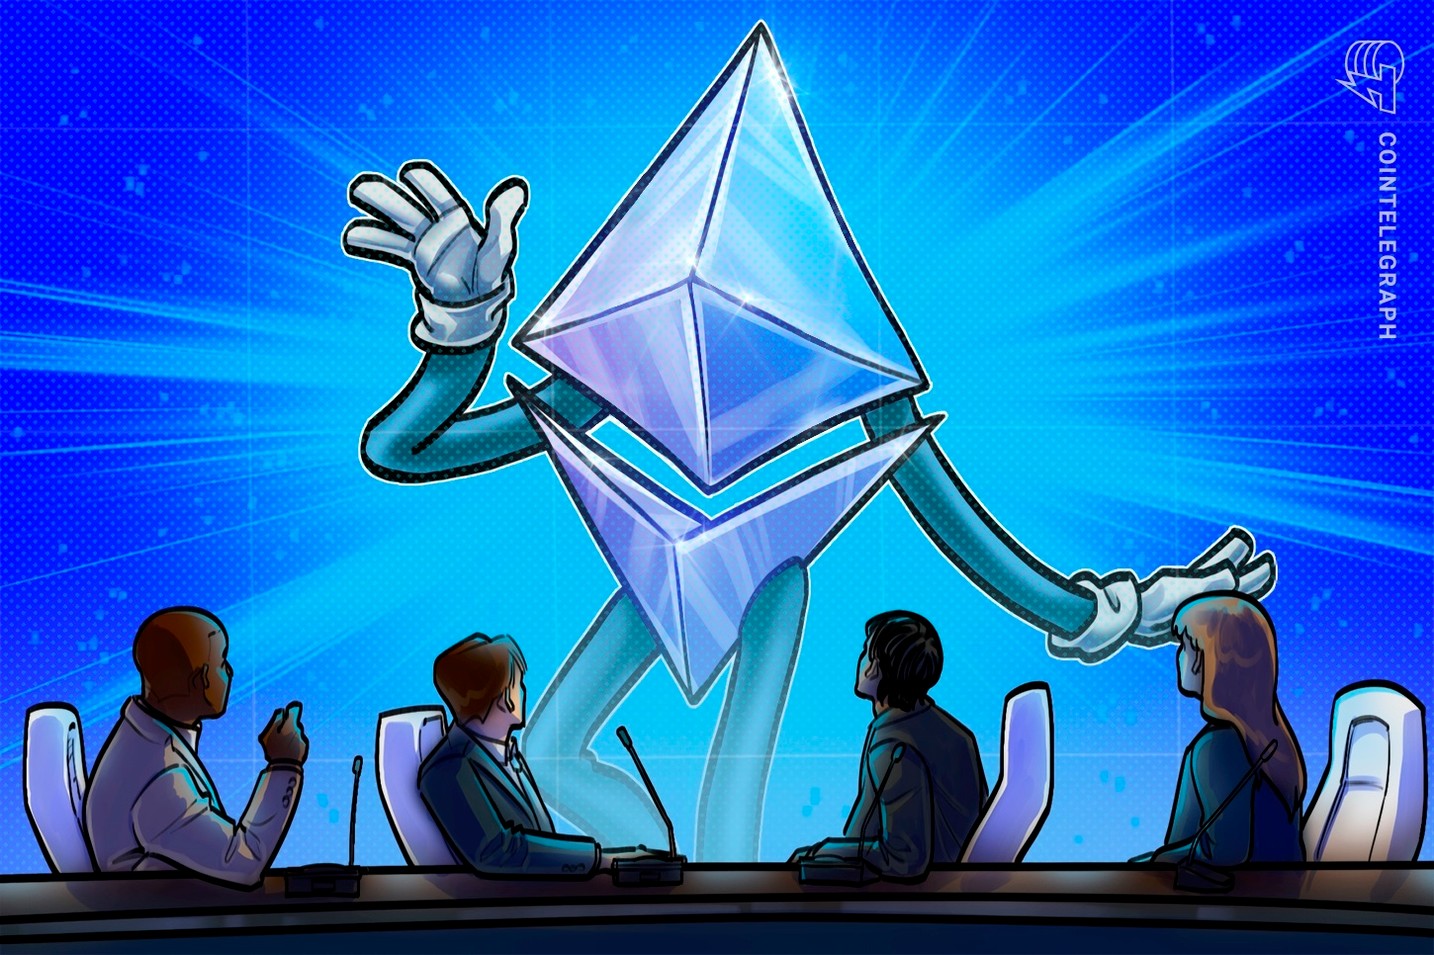 Post-Merge Ethereum: Grayscale extends review of ETHPoW decision